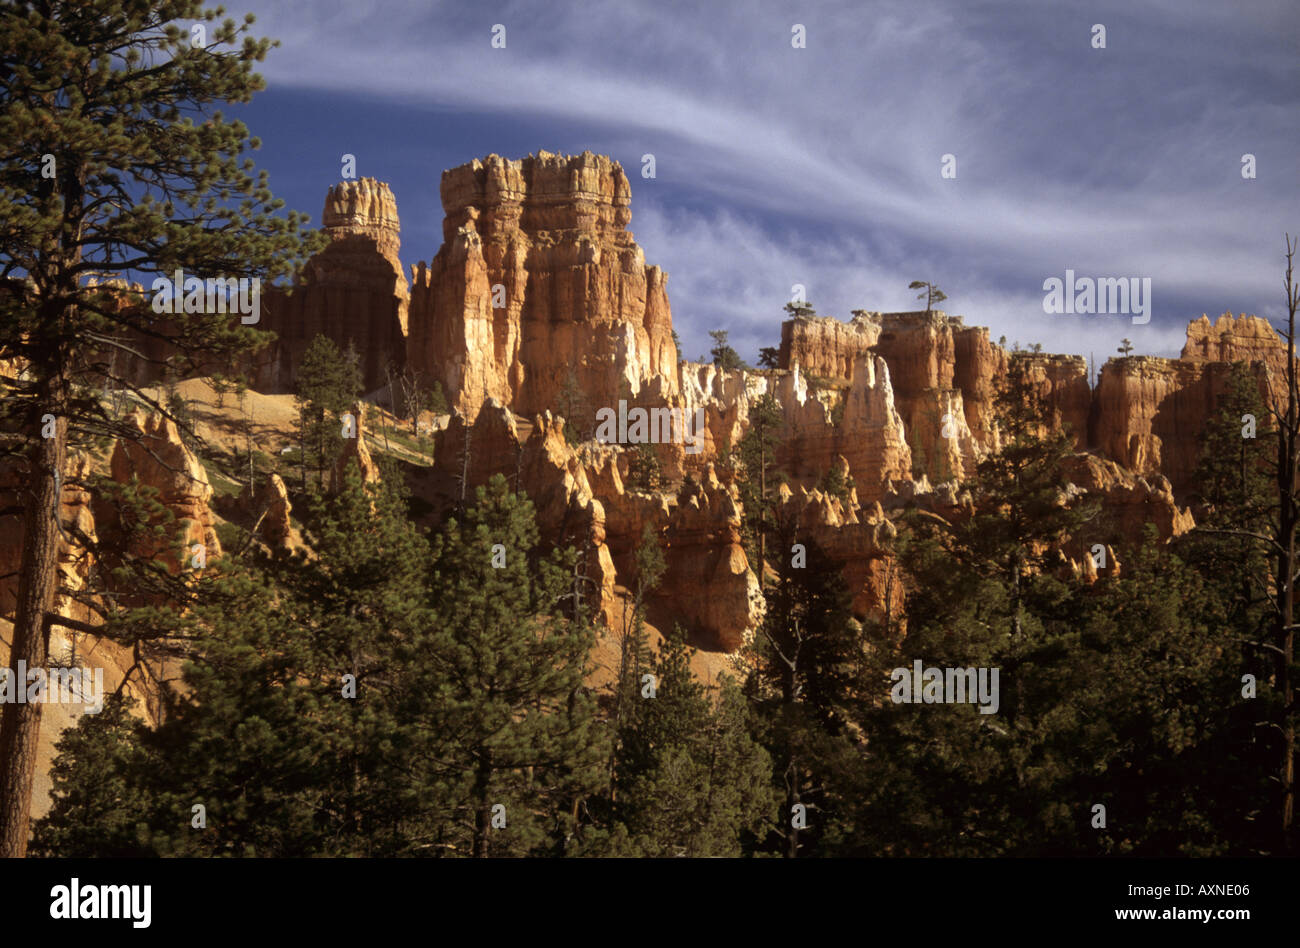 Les cheminées à Bryce Canyon Utah United States of America Banque D'Images